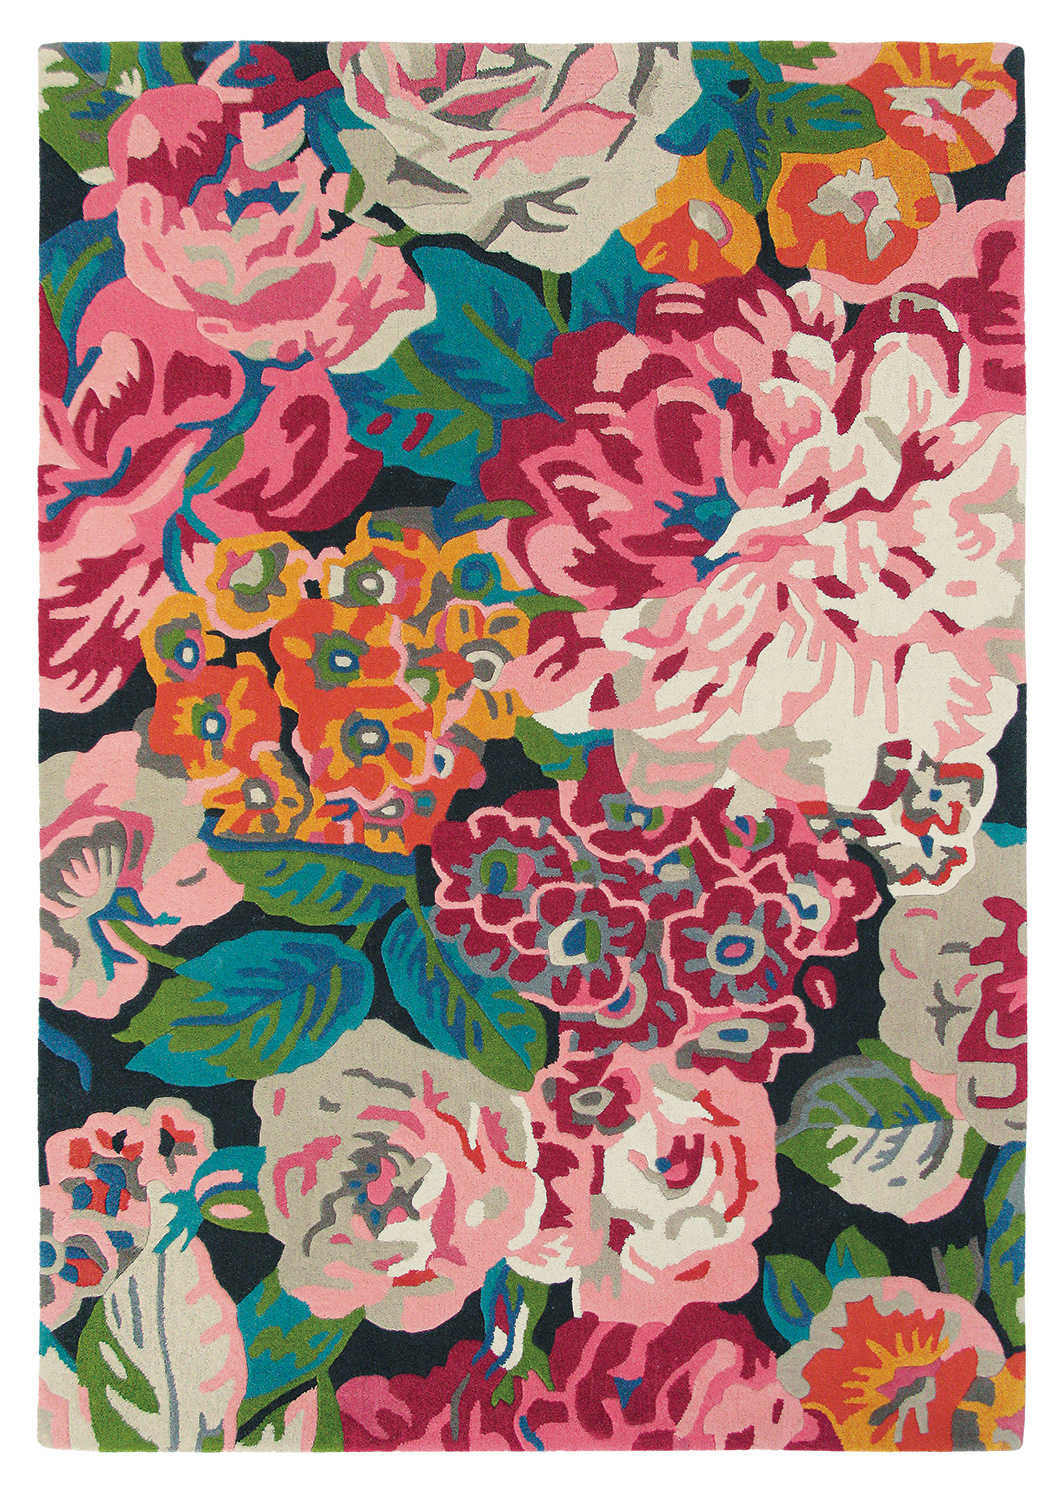 Rectangular rug with illustrated peony and rose design in pink, orange, green and black